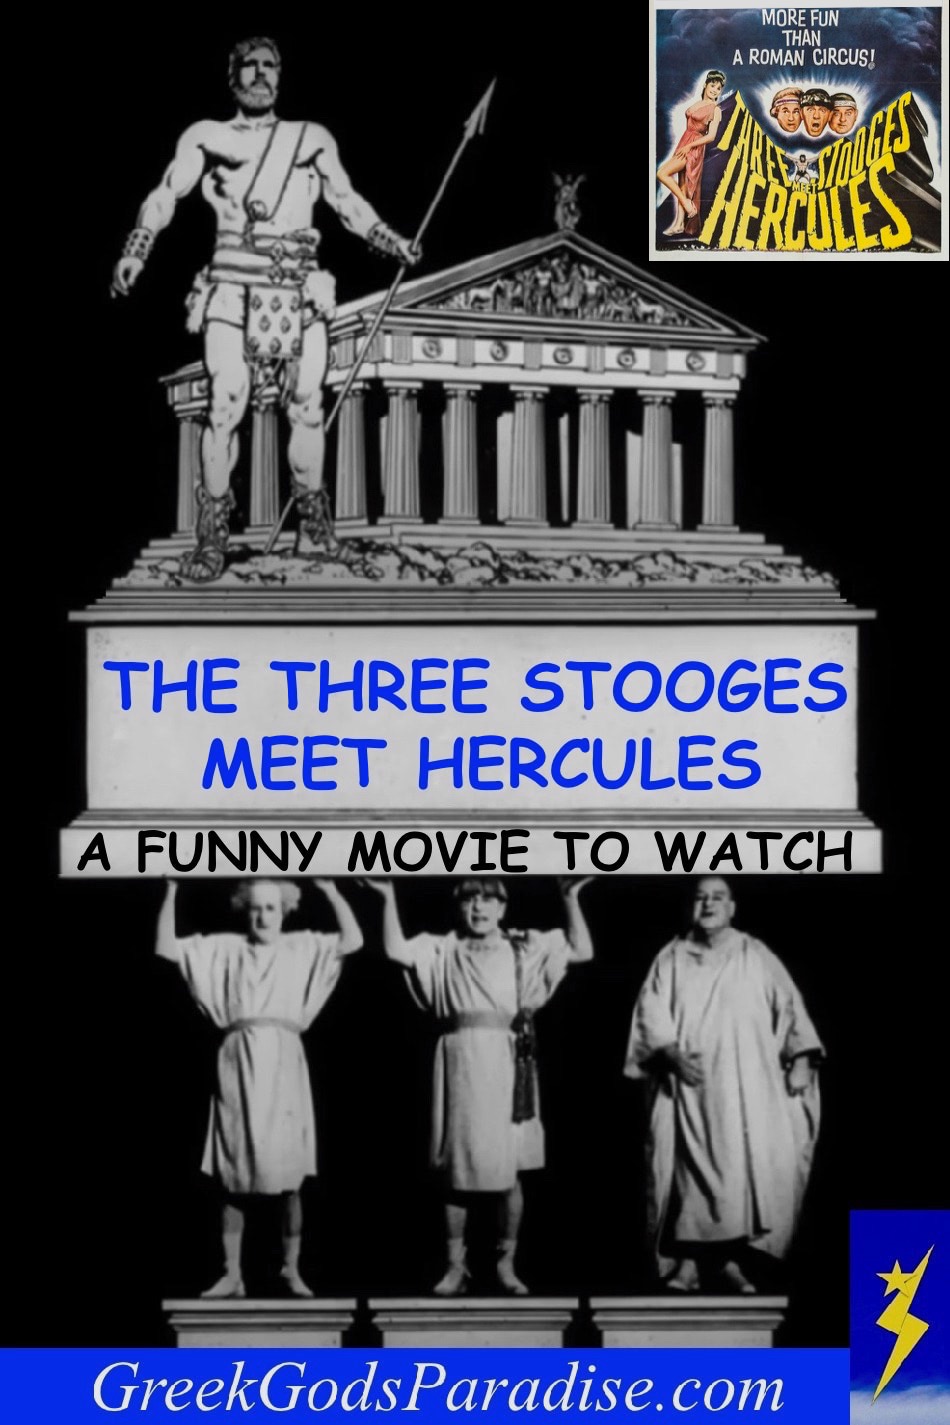 The Three Stooges Meet Hercules Funny Movie To Watch